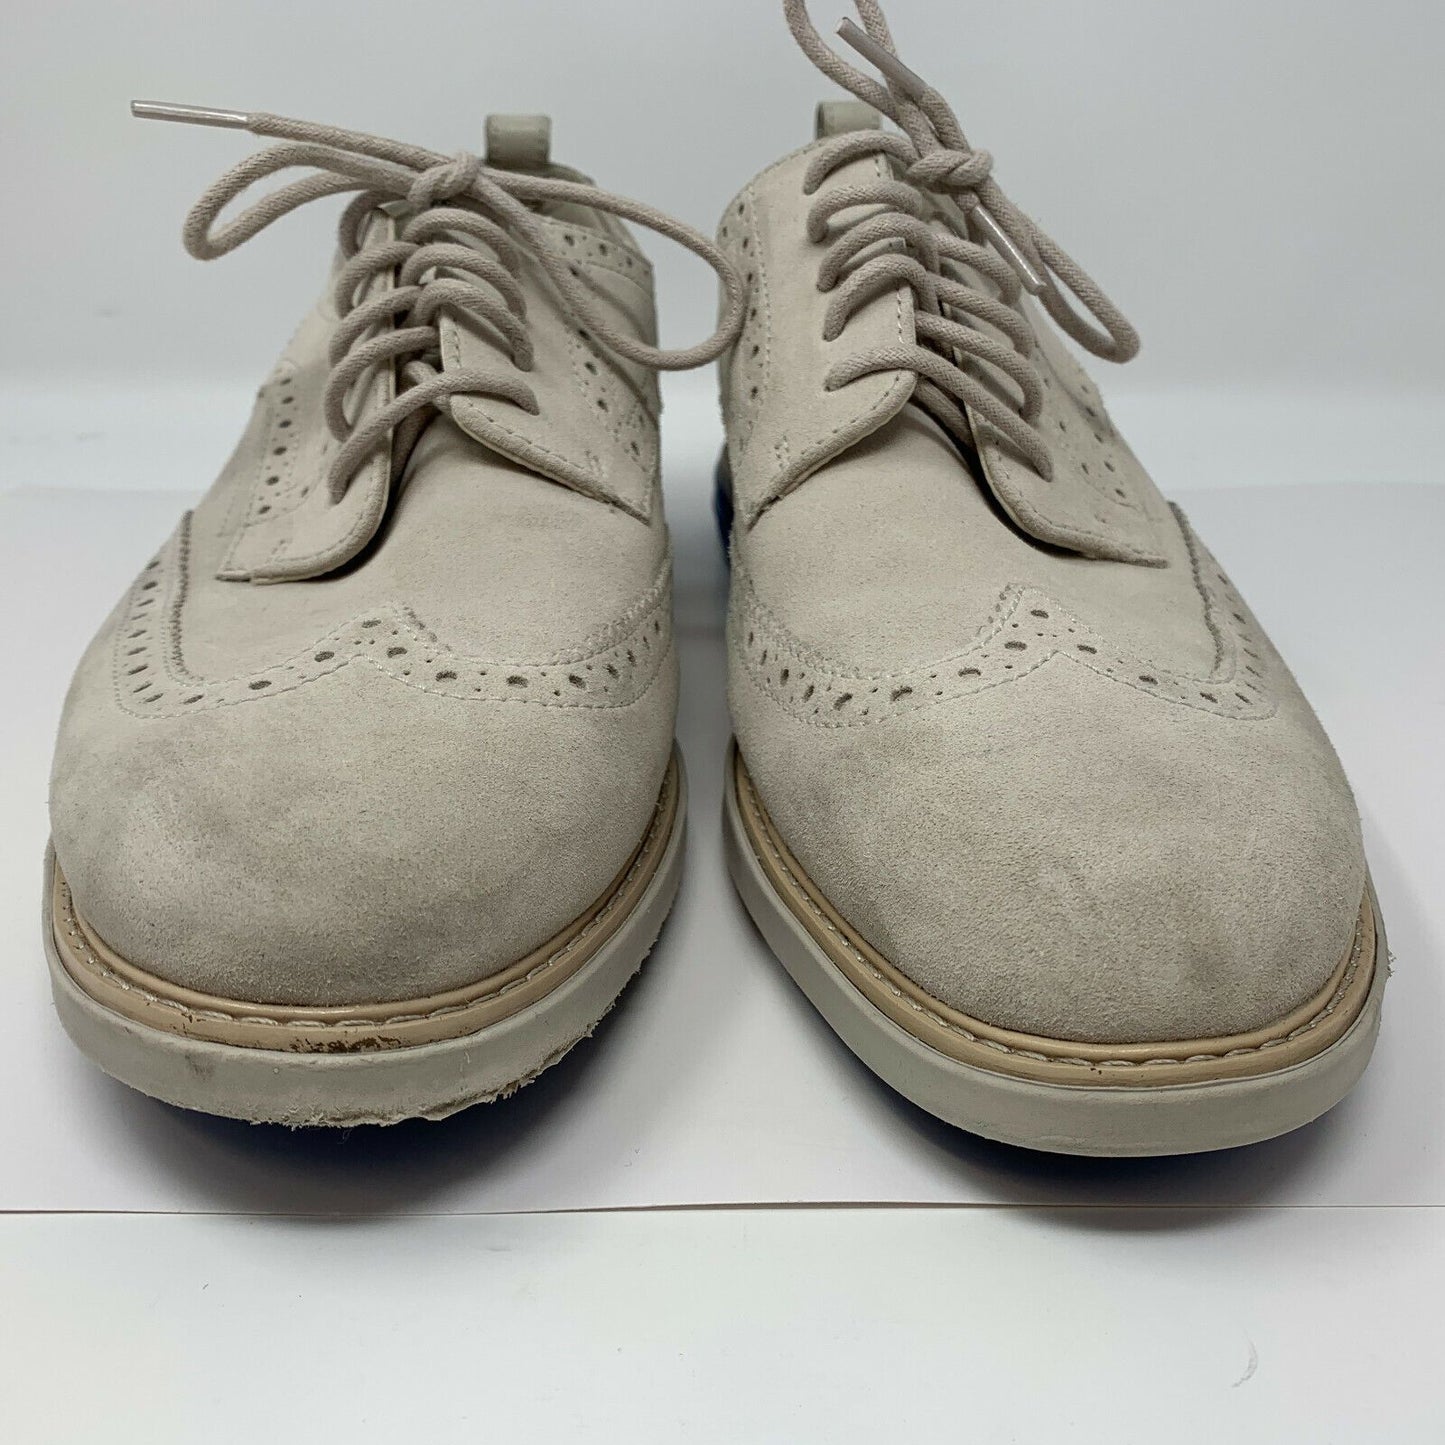 Cole Haan Grand Evolution Mens Wingtip Oxford Shoes C26311 Suede Stone White 10